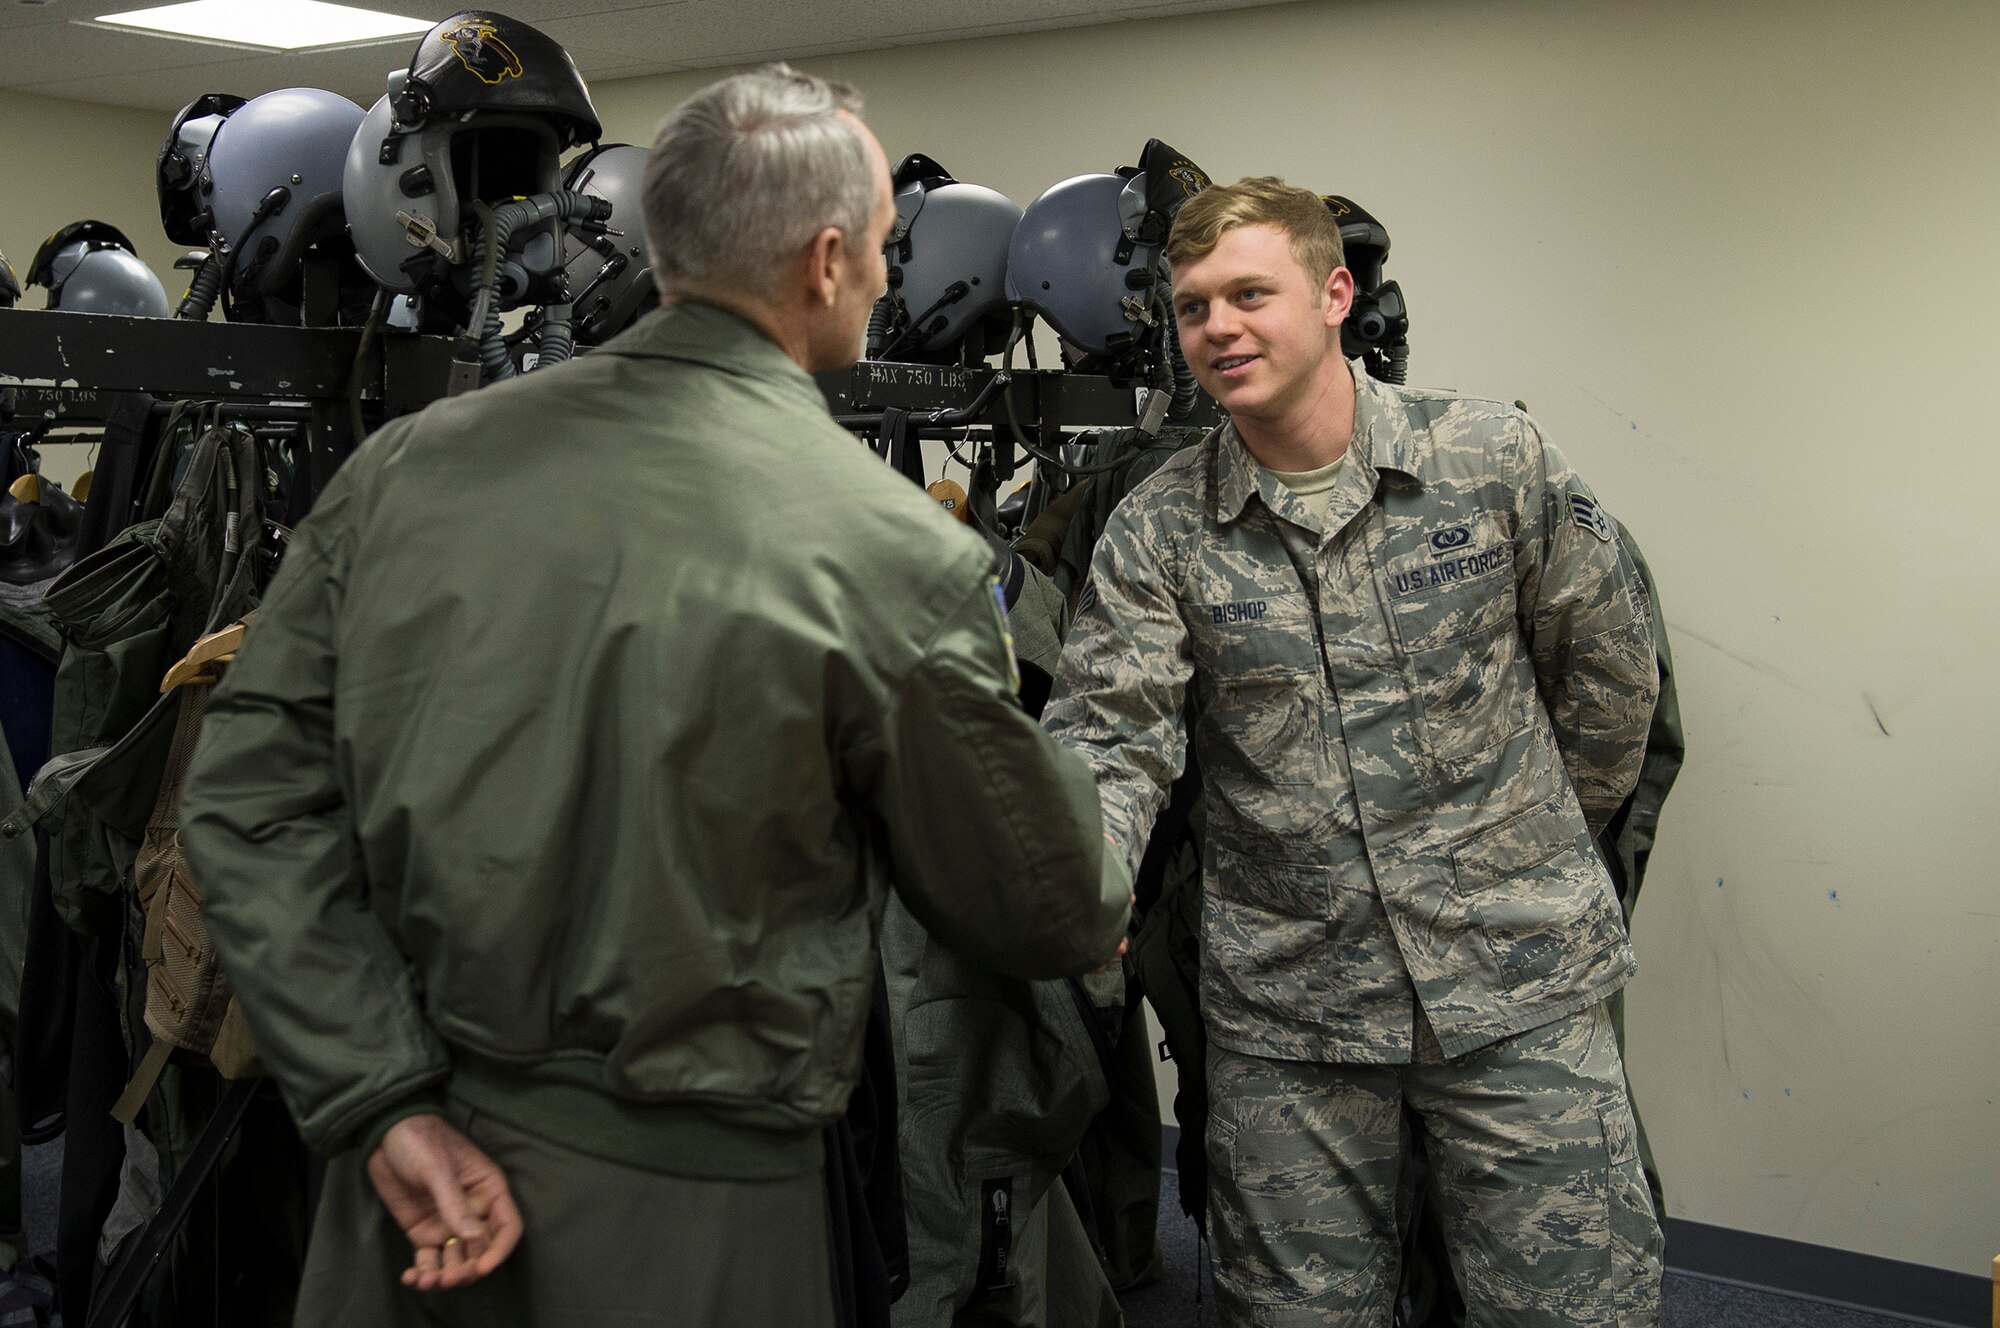 U.S. Air Force Lt. Gen. Darryl Roberson, 3rd Air Force commander, congratulates U.S. Air Force Senior Airman Justin Bishop, 871st Air Expeditionary Squadron aircrew flight equipment, on his recent selection to the Air Force Academy Preparatory School at the Icelandic Air Surveillance and Policing operations center in Keflavik, Iceland,  April 23, 2015. Roberson toured the facilities and spoke with Airmen regarding the IAS mission, an ongoing NATO commitment to maintain the security of Iceland’s airspace. (U.S. Air Force photo by Staff Sgt. Chad Warren/Released)